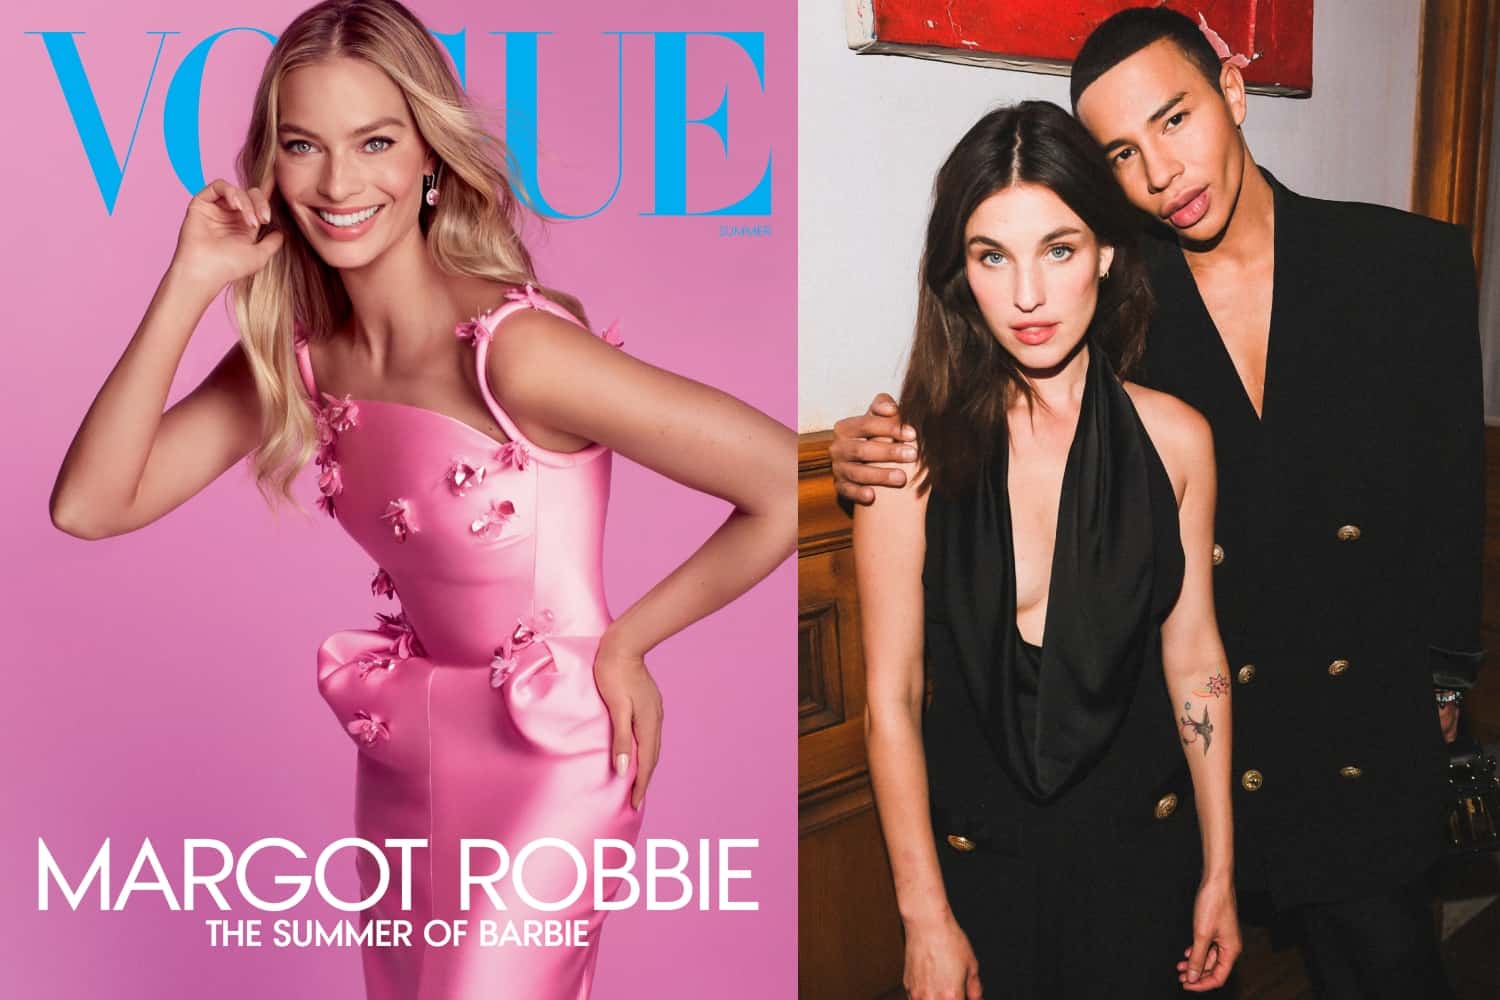 Margot Robbie Is Vogue’s Summer Cover Girl, Olivier Rousteing Showcases Balmain Pre-Fall ’23 At Hotel Chelsea, Dua Lipa Covers Dazed, And More!